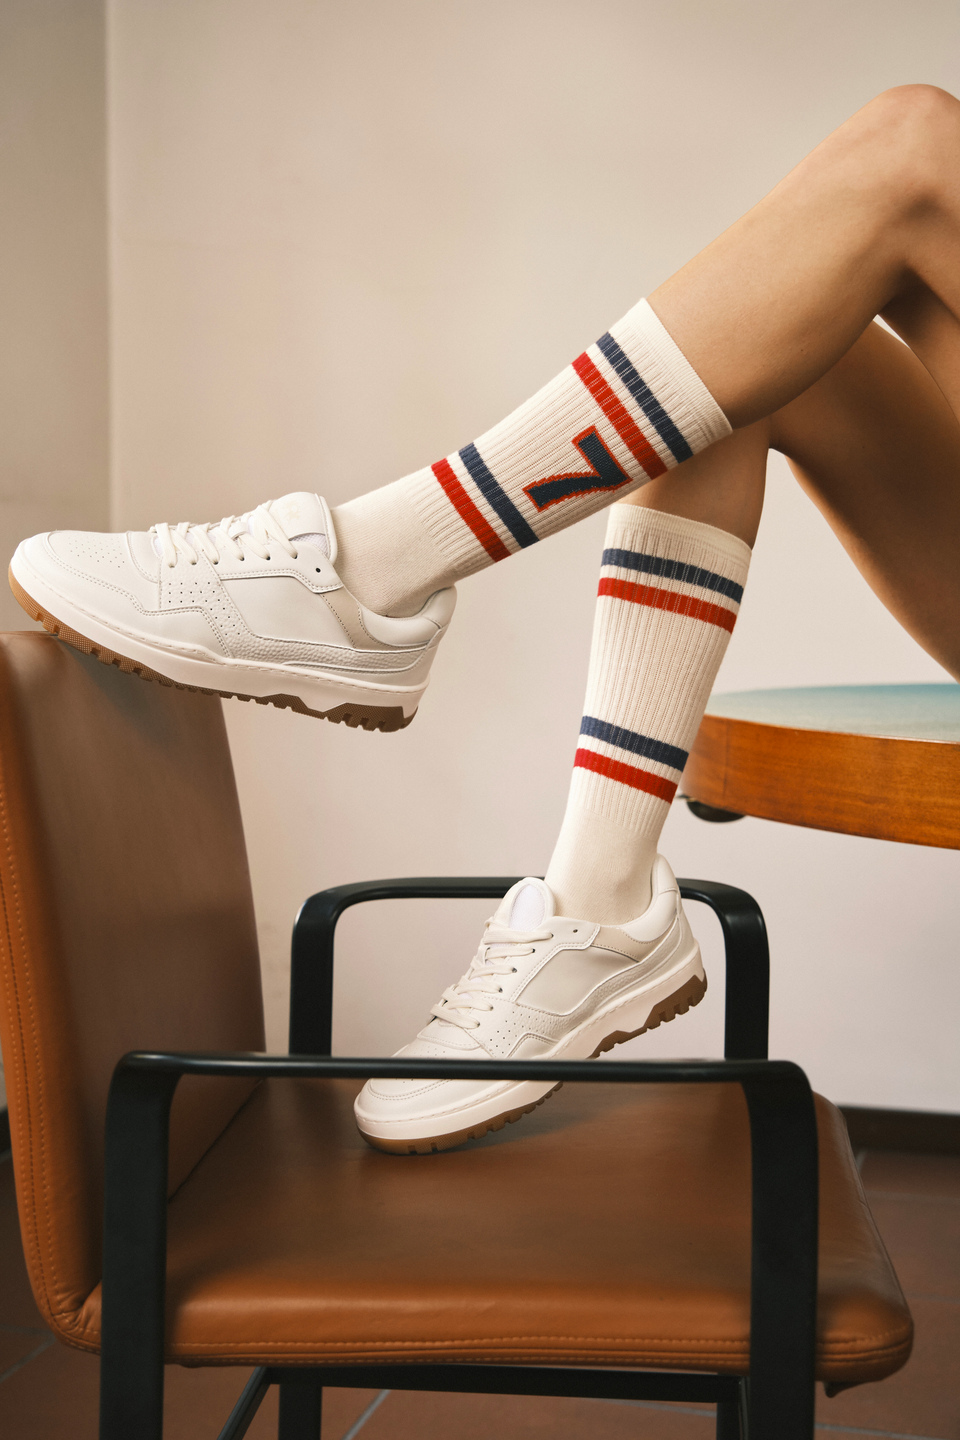 Women's vintage basketball sneaker in mixed vegetable leather - Field 85 | La Martina - Official Online Shop